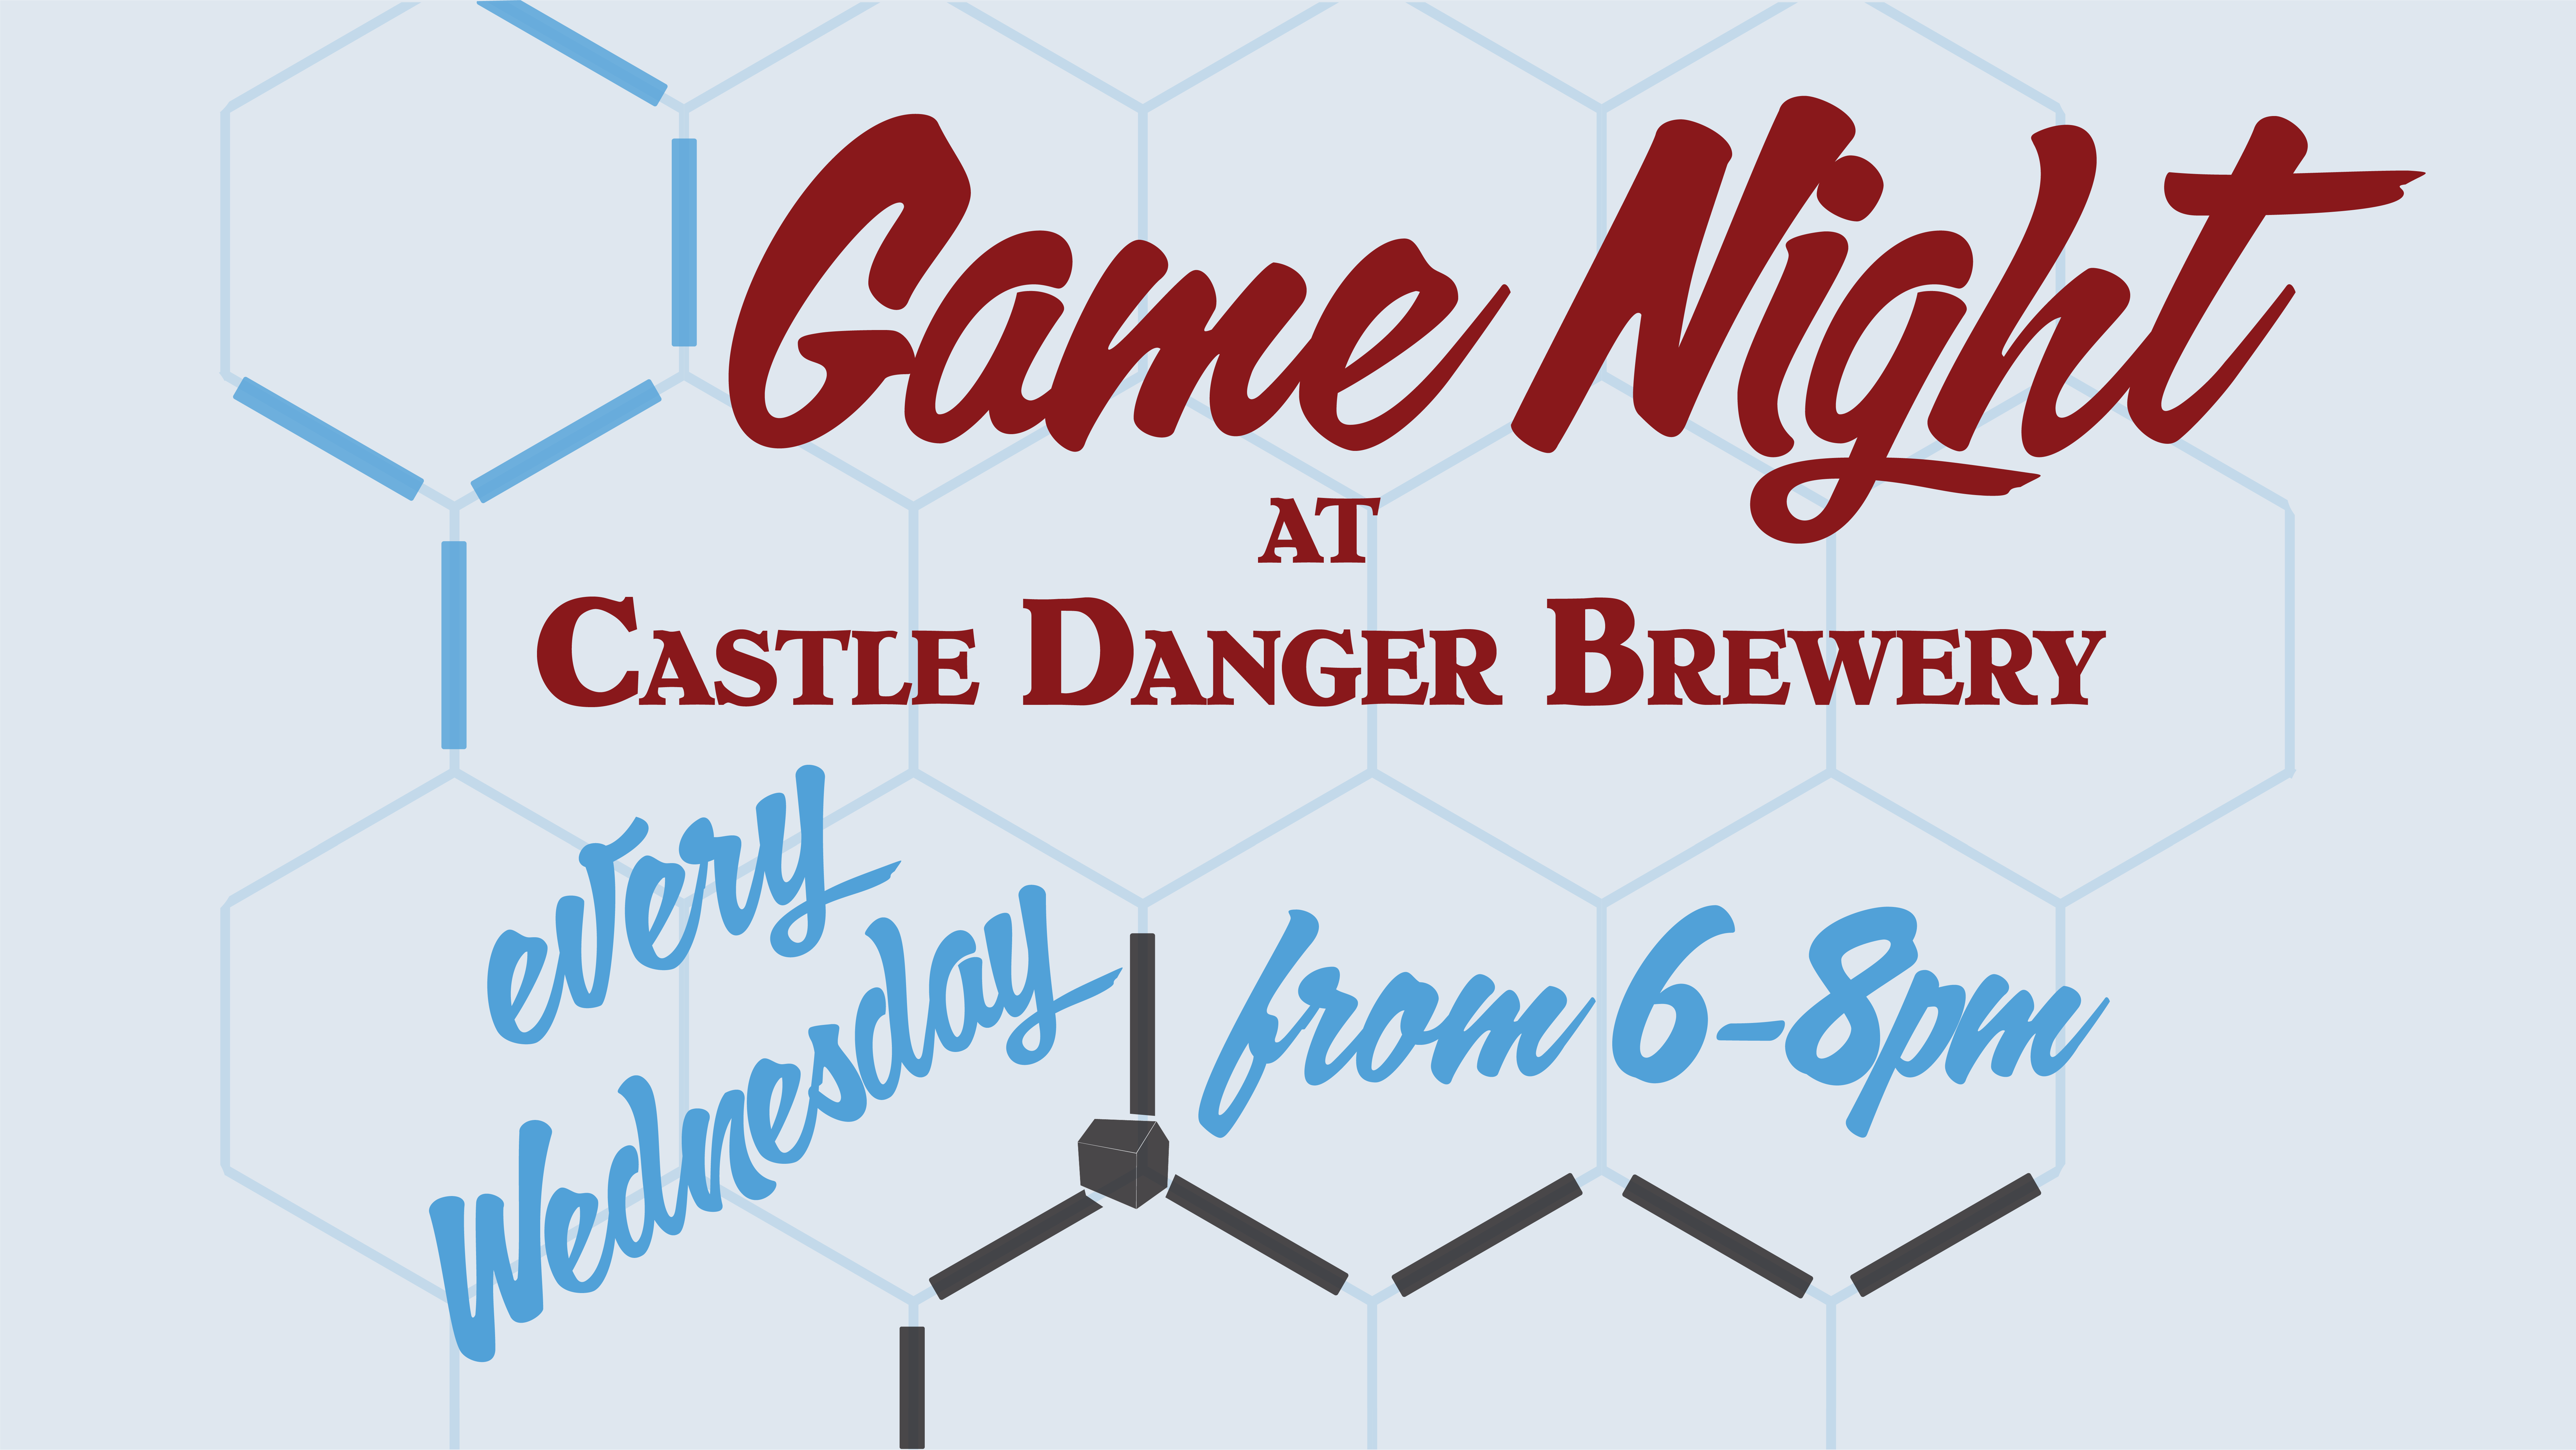 game night at castle danger brewery from six to 8pm every Wednesday night.